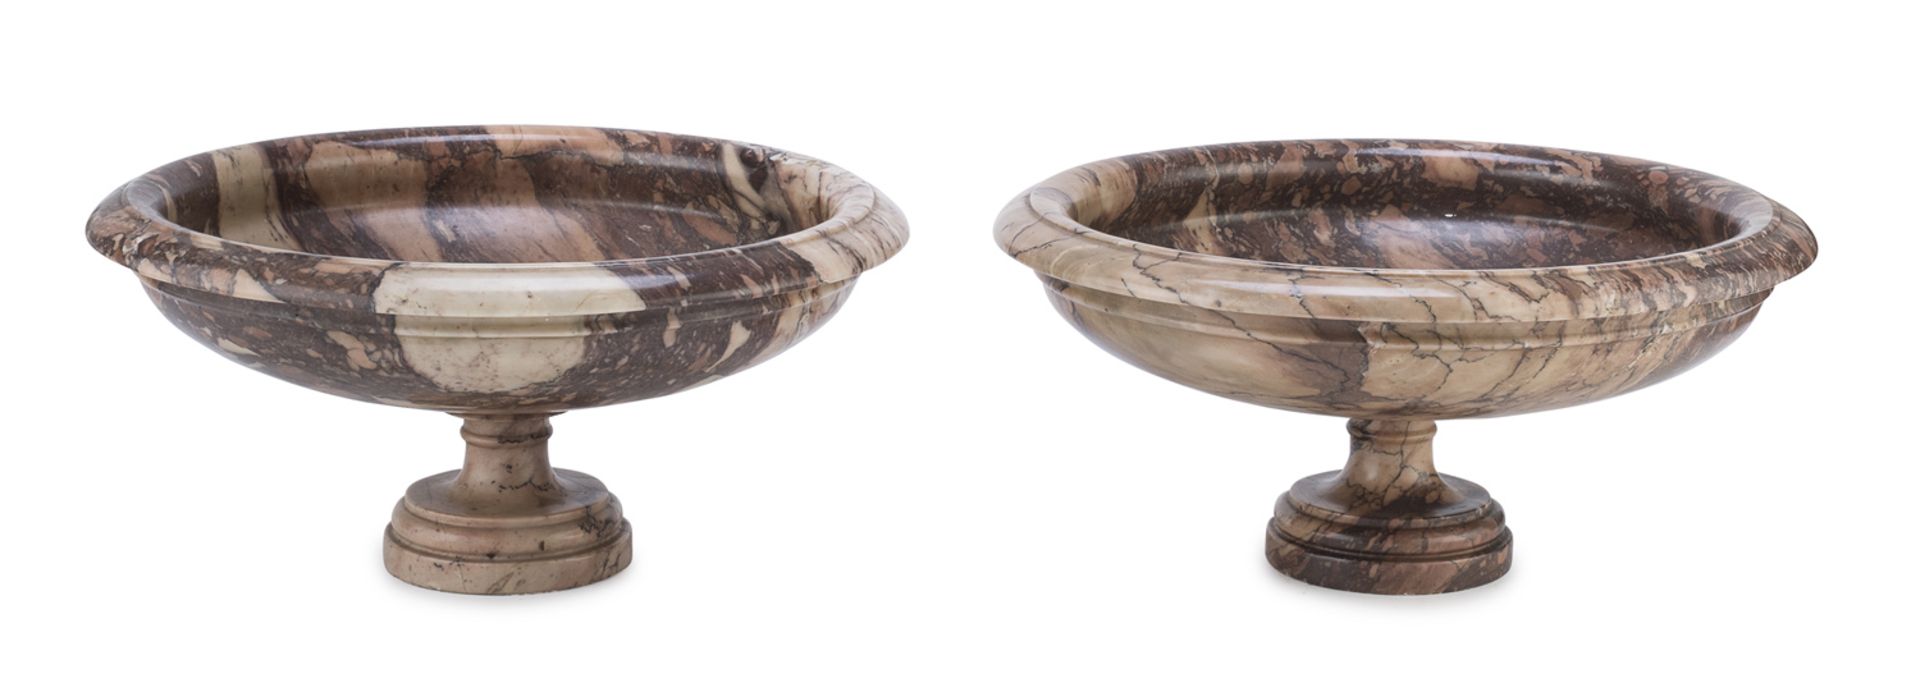 PAIR OF BASINS IN AFRICAN MARBLE